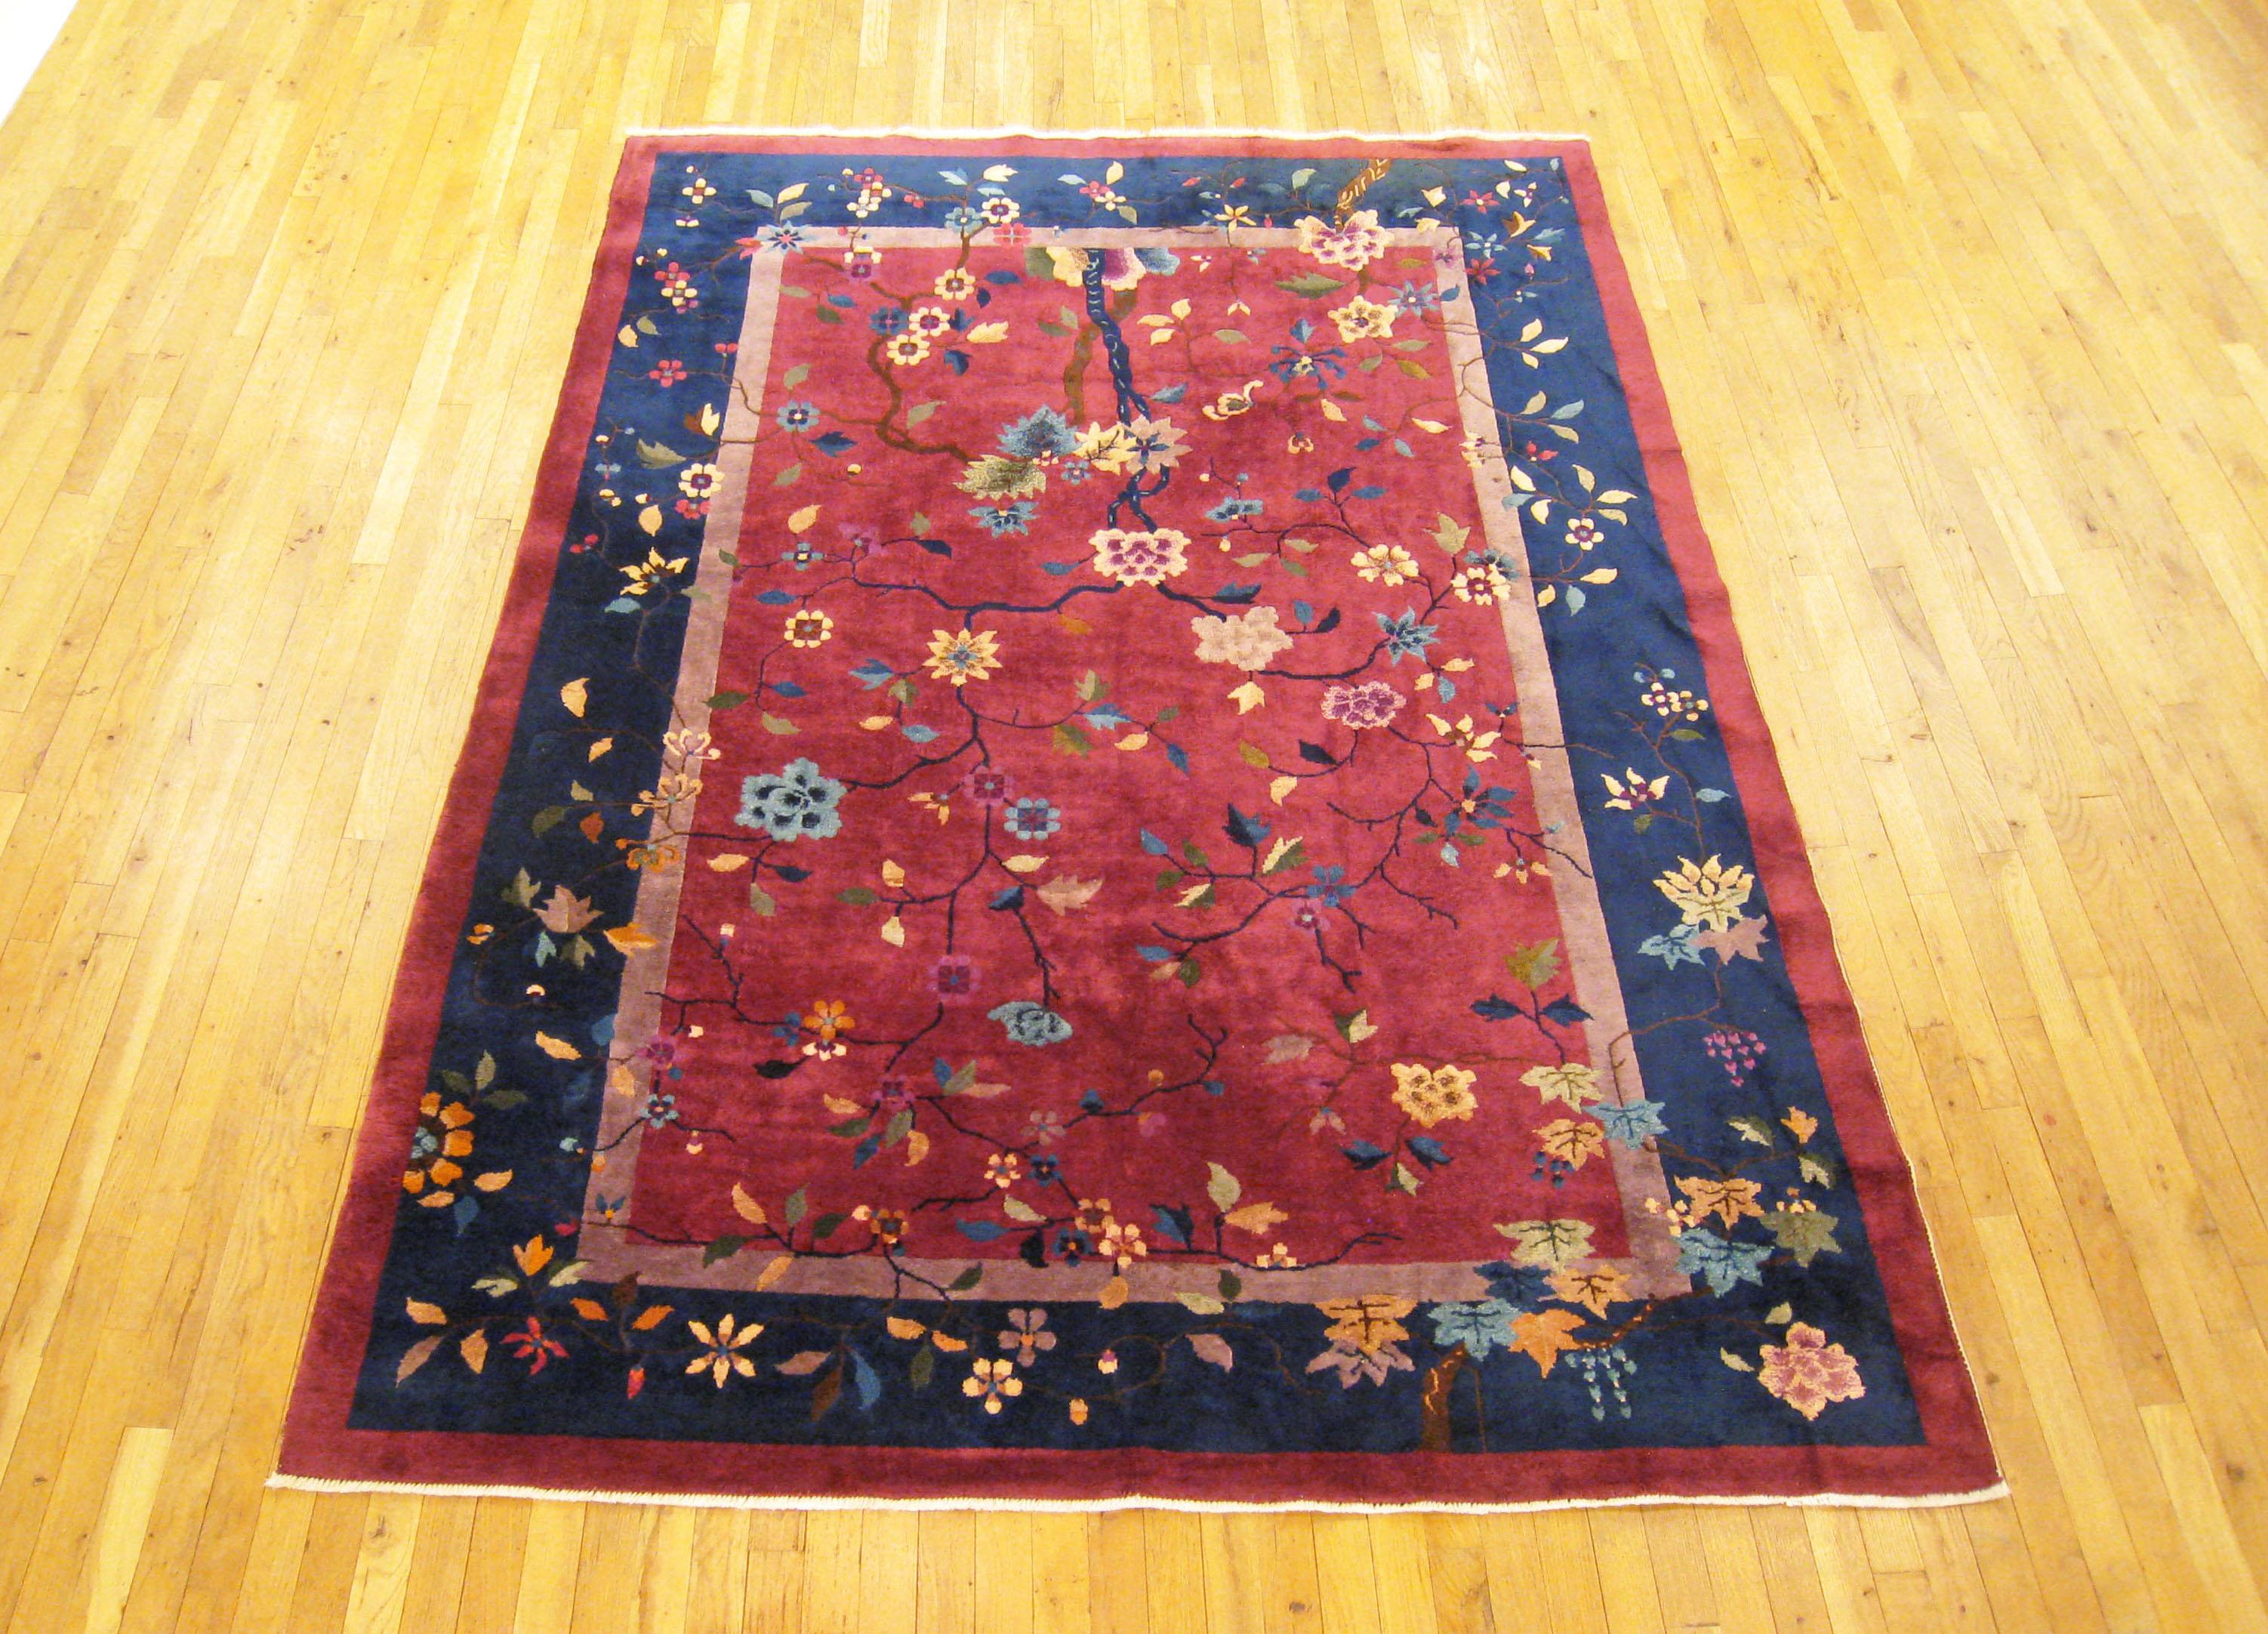 Antique Chinese rug, room size, circa 1920.

A one-of-a-kind antique Chinese oriental carpet, hand-knotted with medium thickness wool pile. This beautiful hand-knotted rug features floral elements allover a soft red field, with a blue outer border